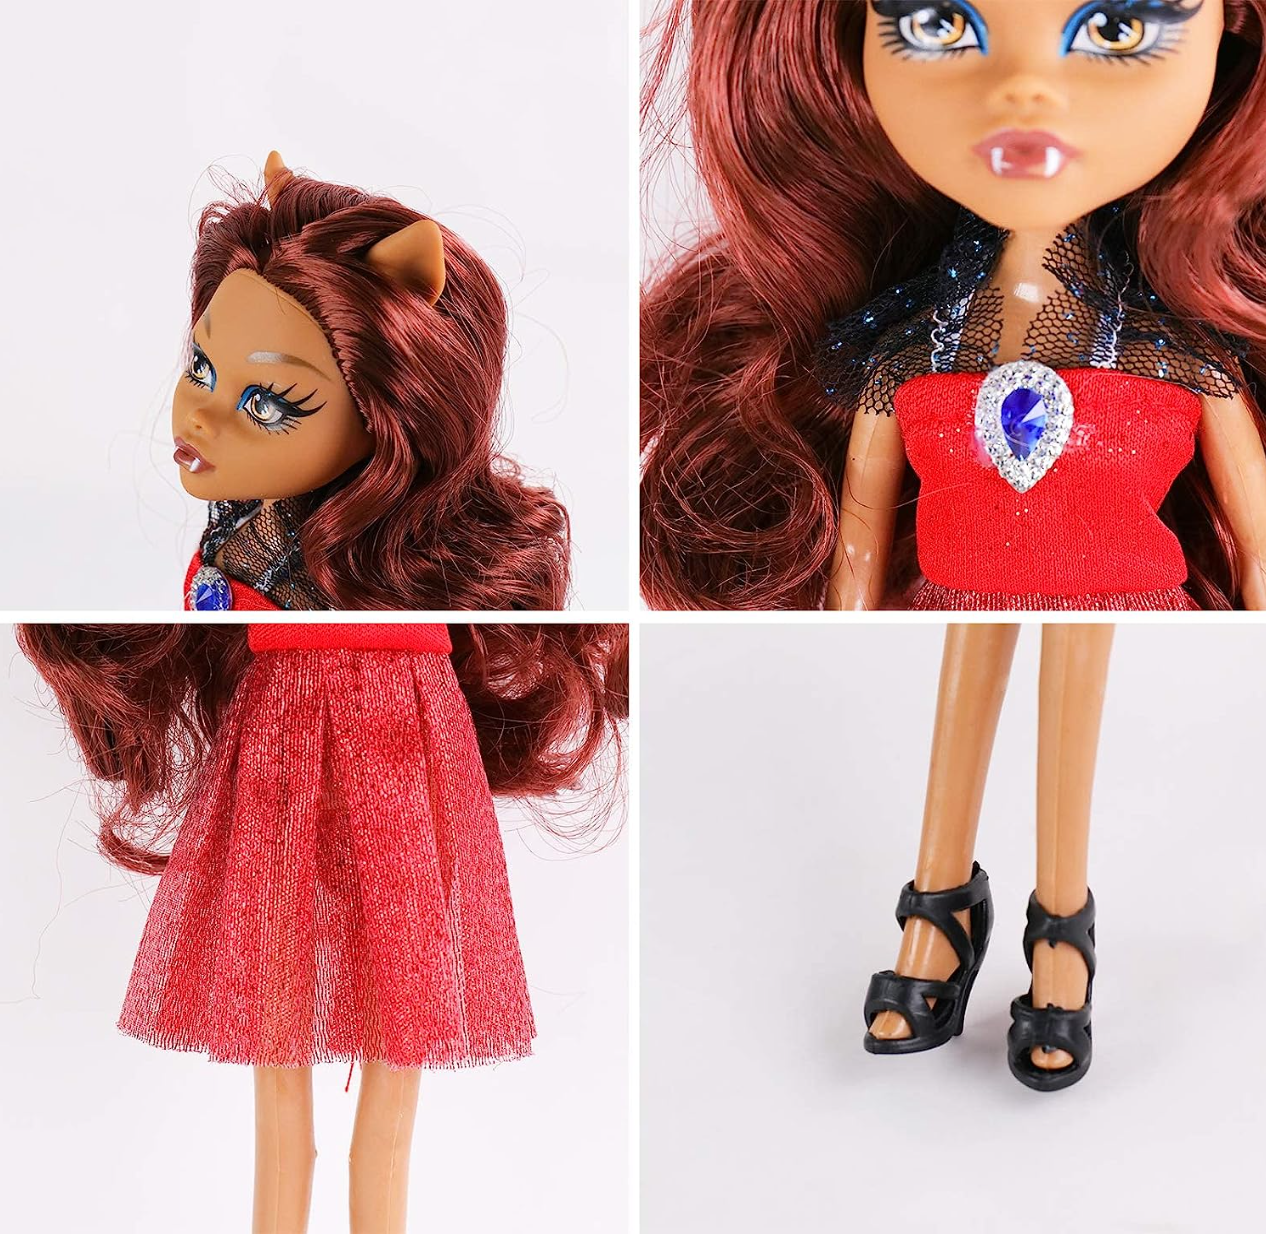 ONEST 5 Sets 9 Inch Monster Girl Dolls Include 5 Pieces Girl Monster Dolls, 5 Pieces Handmade Doll Clothes, 5 Pairs of Doll Shoes